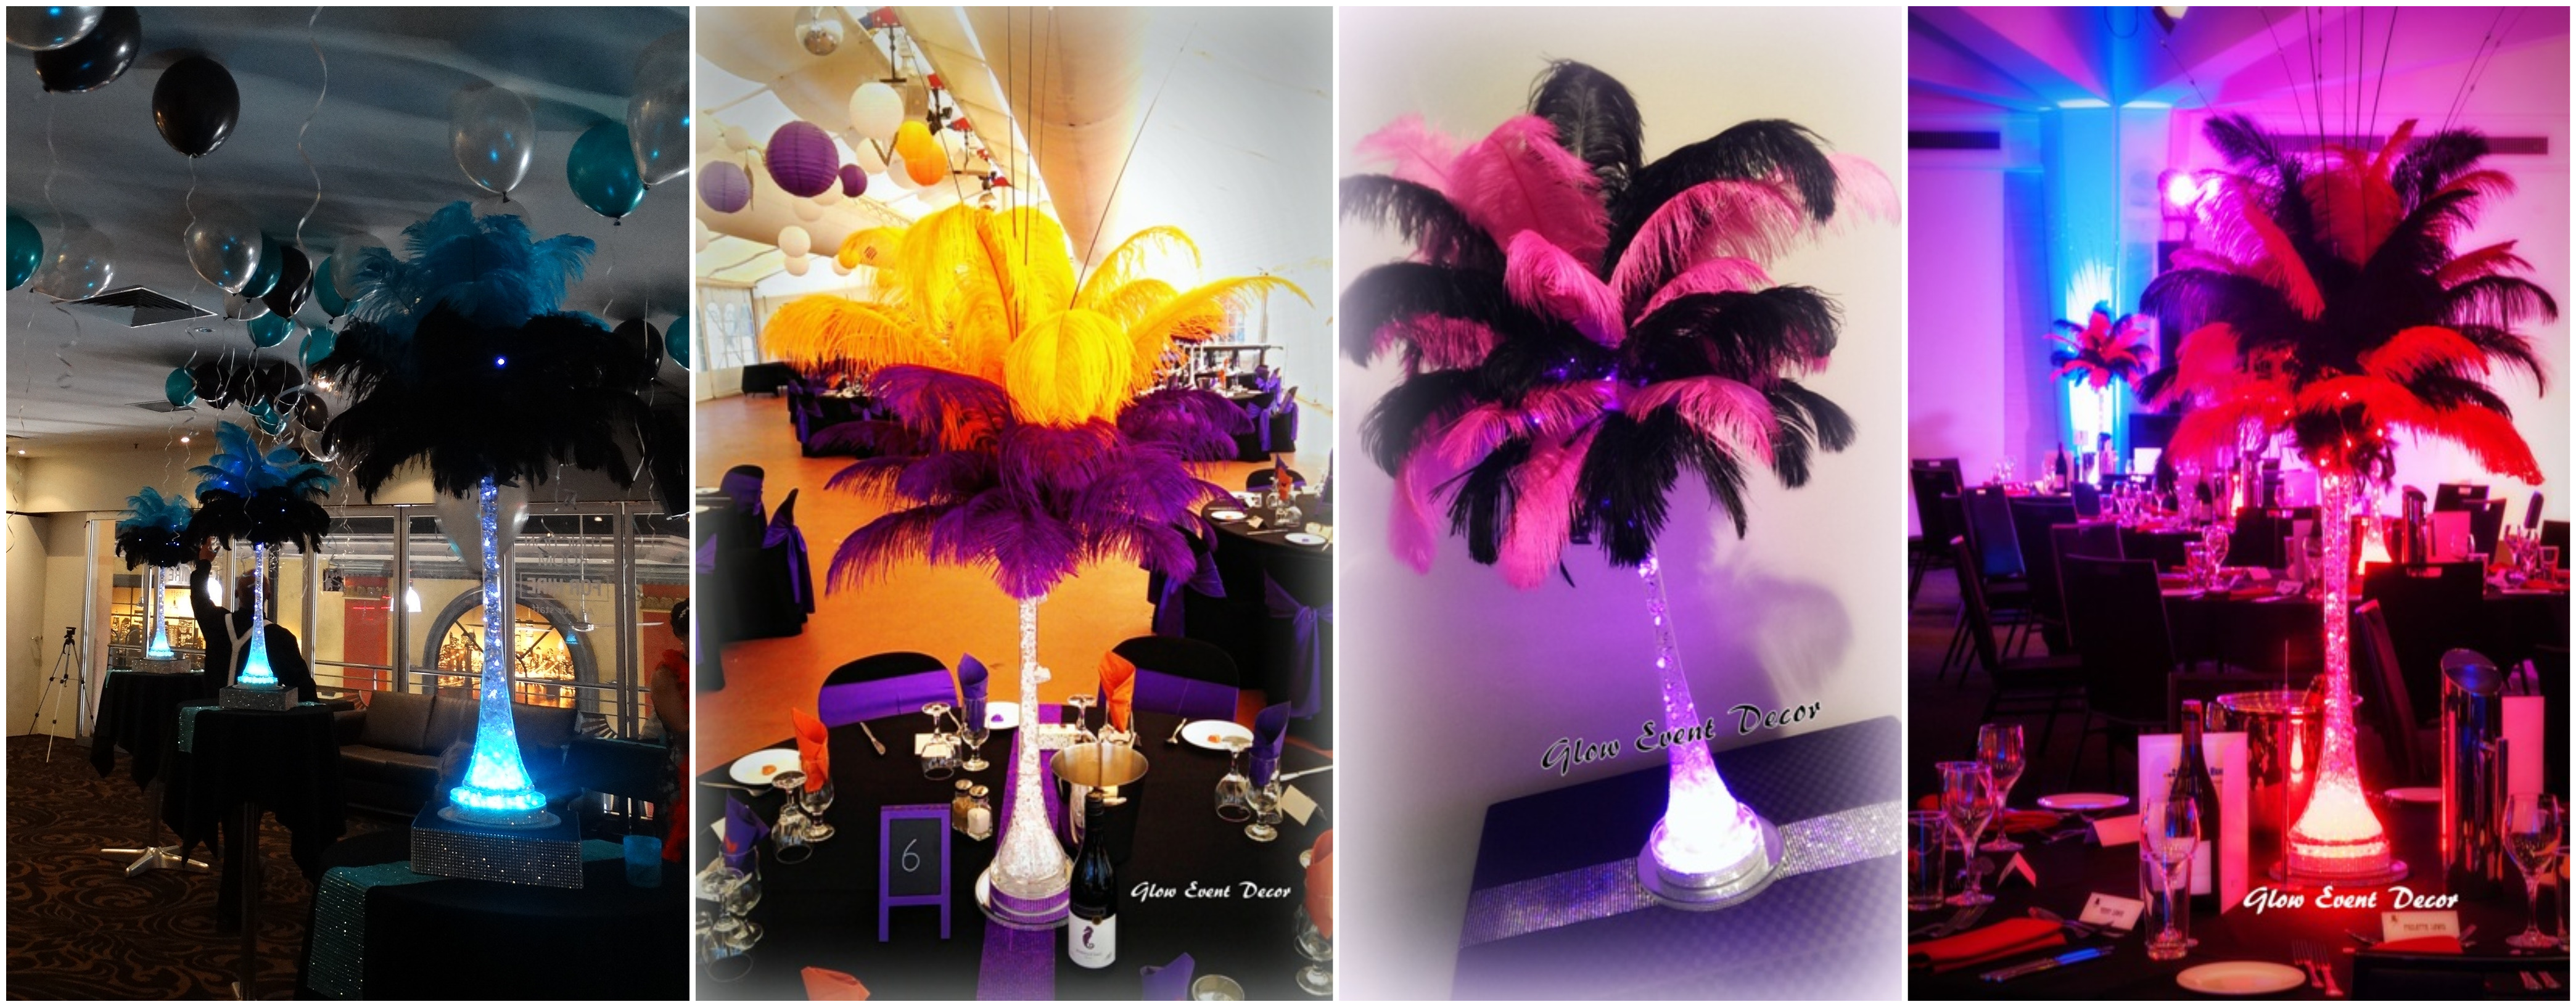 Ostrich feather table centrepiece decorations with LED eiffel tower vase, and LED lighting, available for hire from glow event decor in adelaide